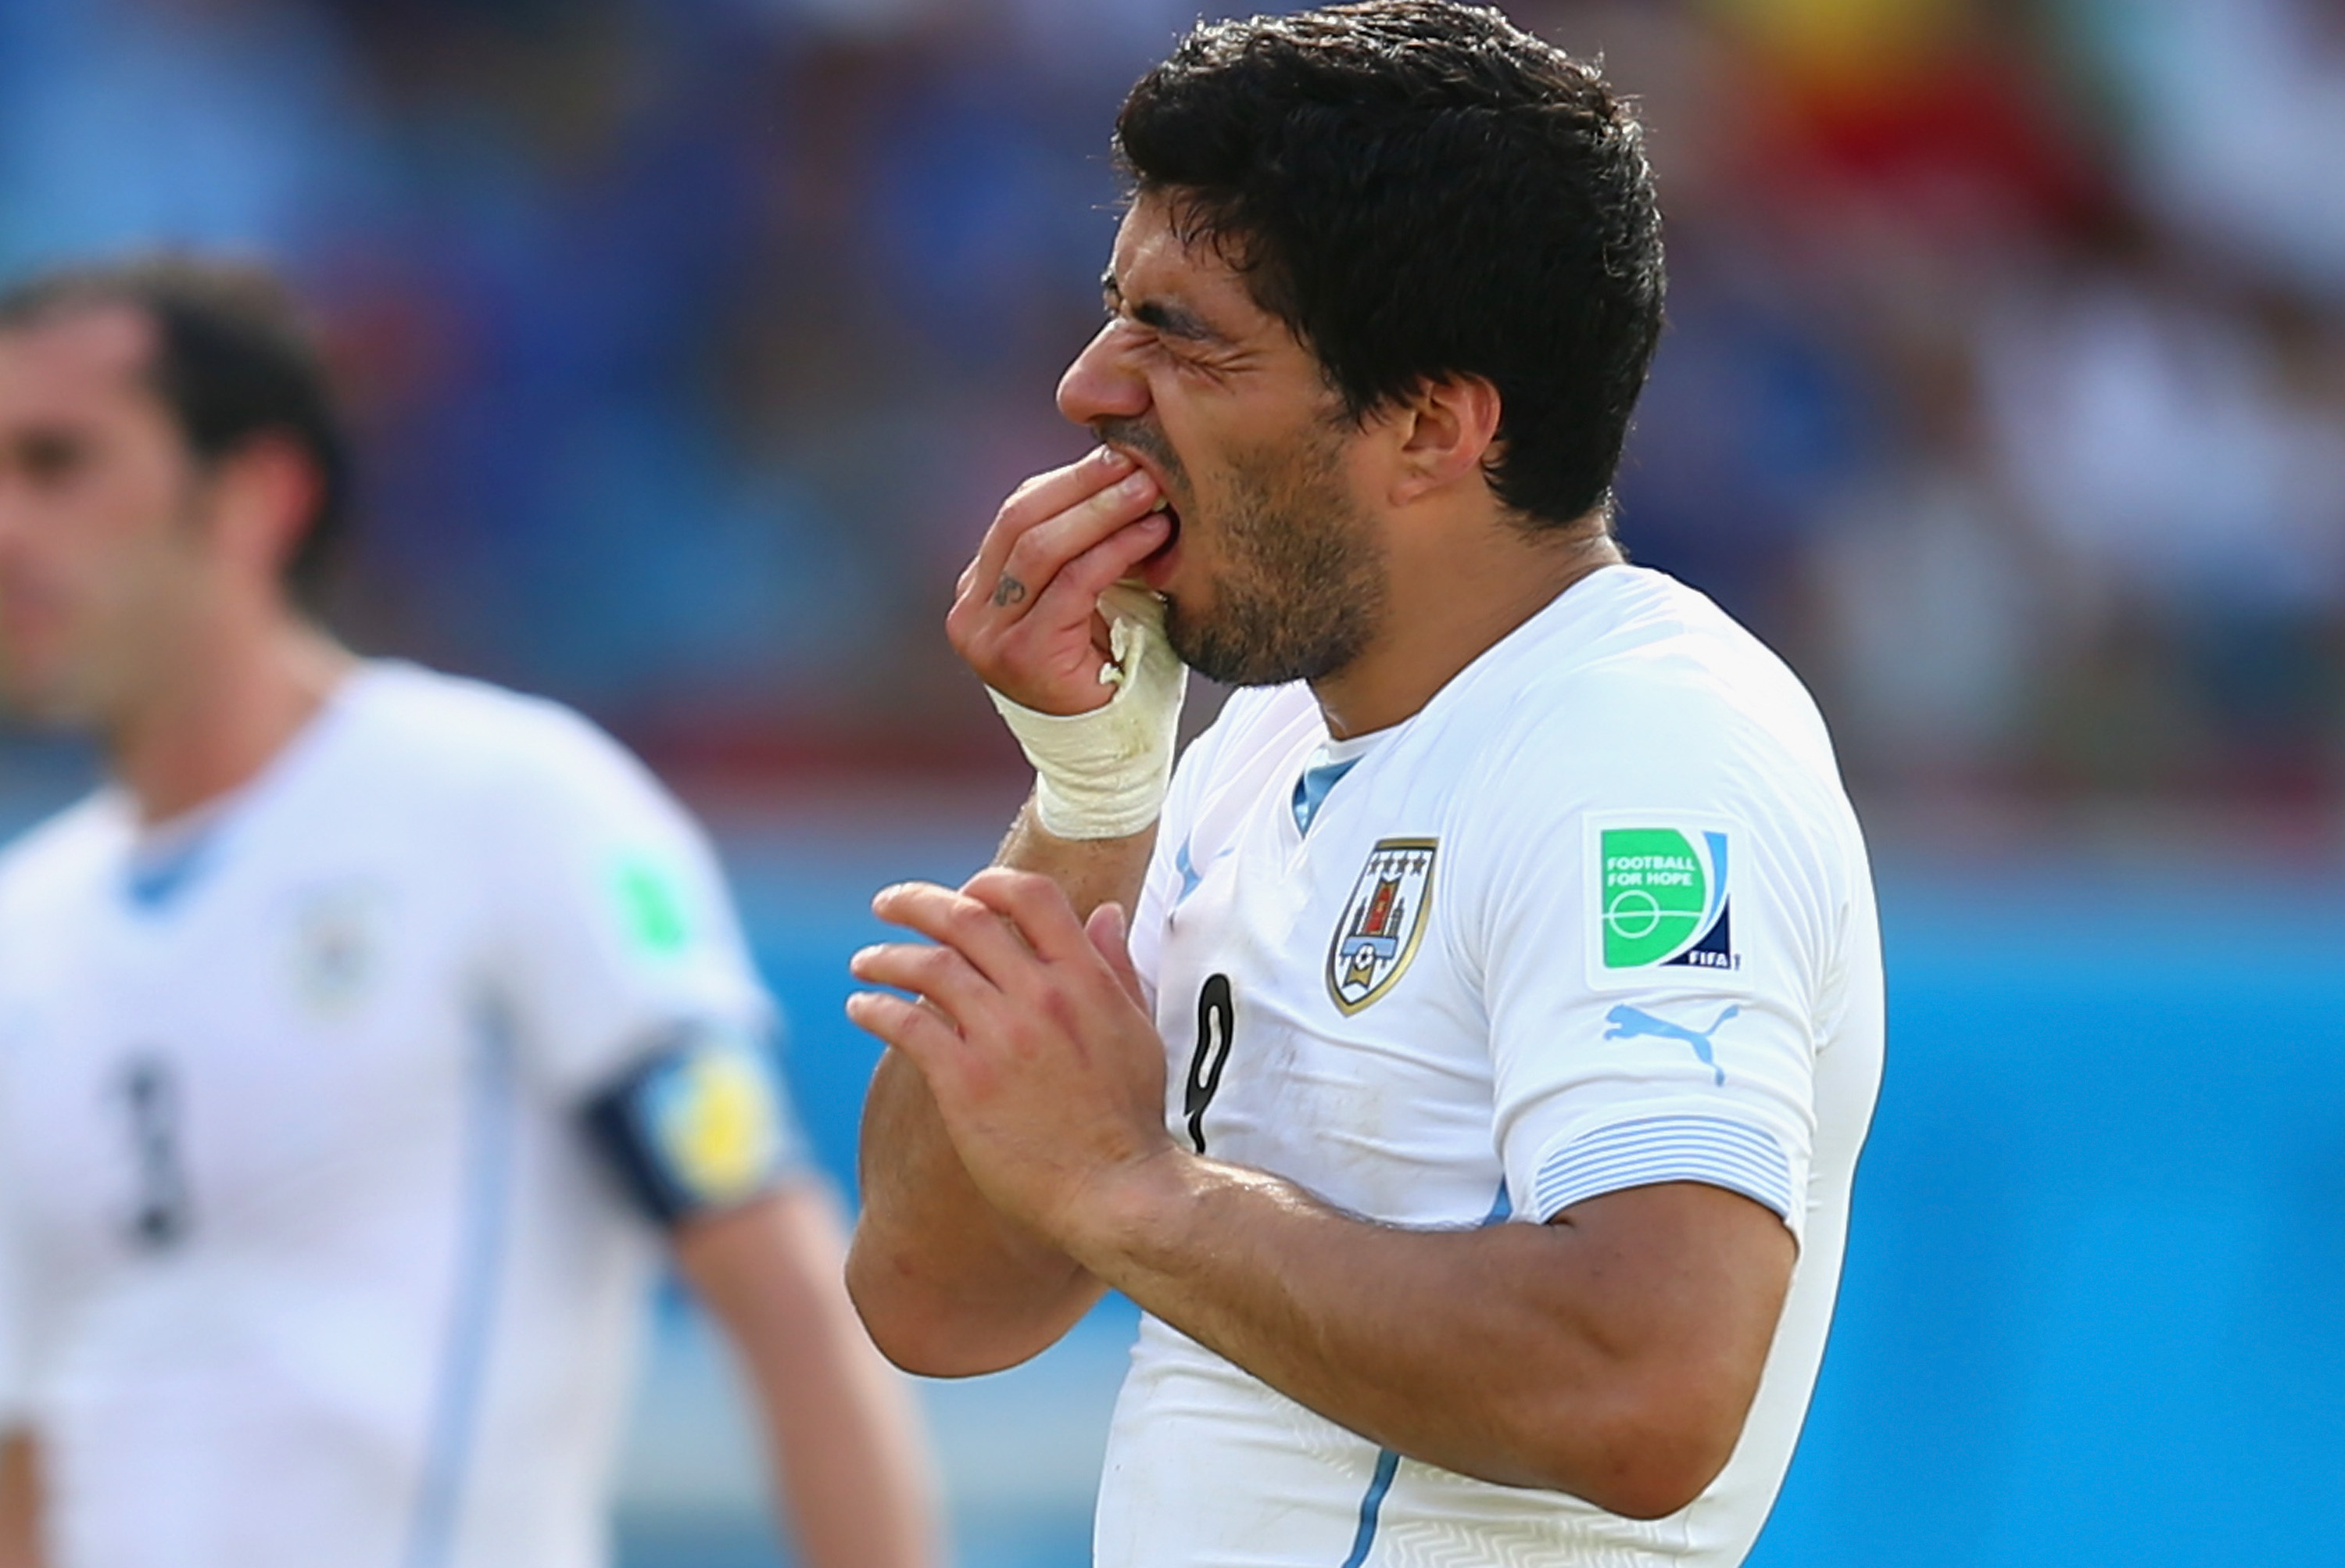 The Suárez Scandal: Why Uruguay Should Banish Luis The Lout